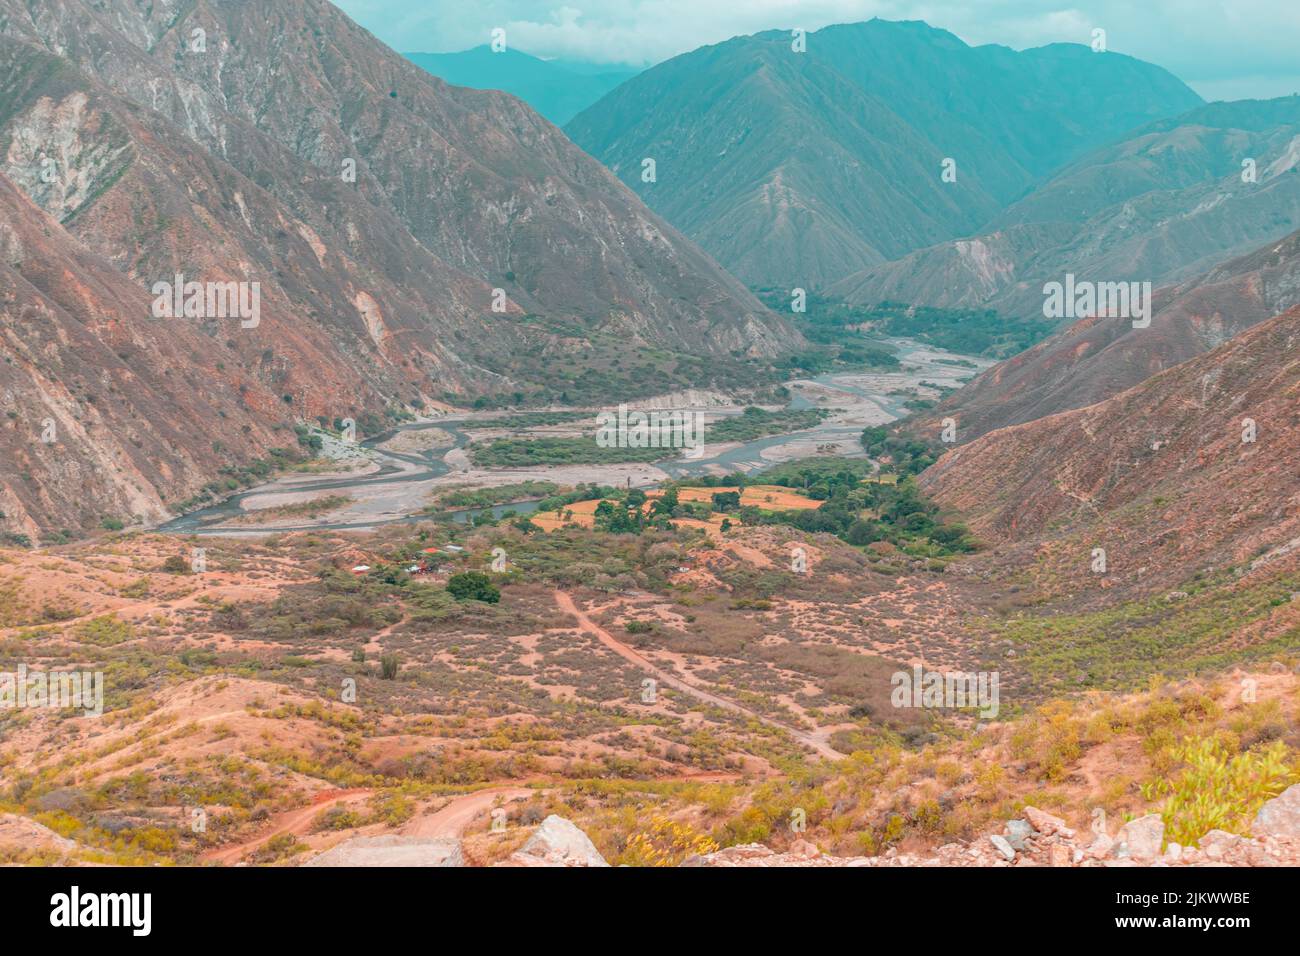 The landscapes from the Chicamocha canyon in the region of Santander, Colombia Stock Photo